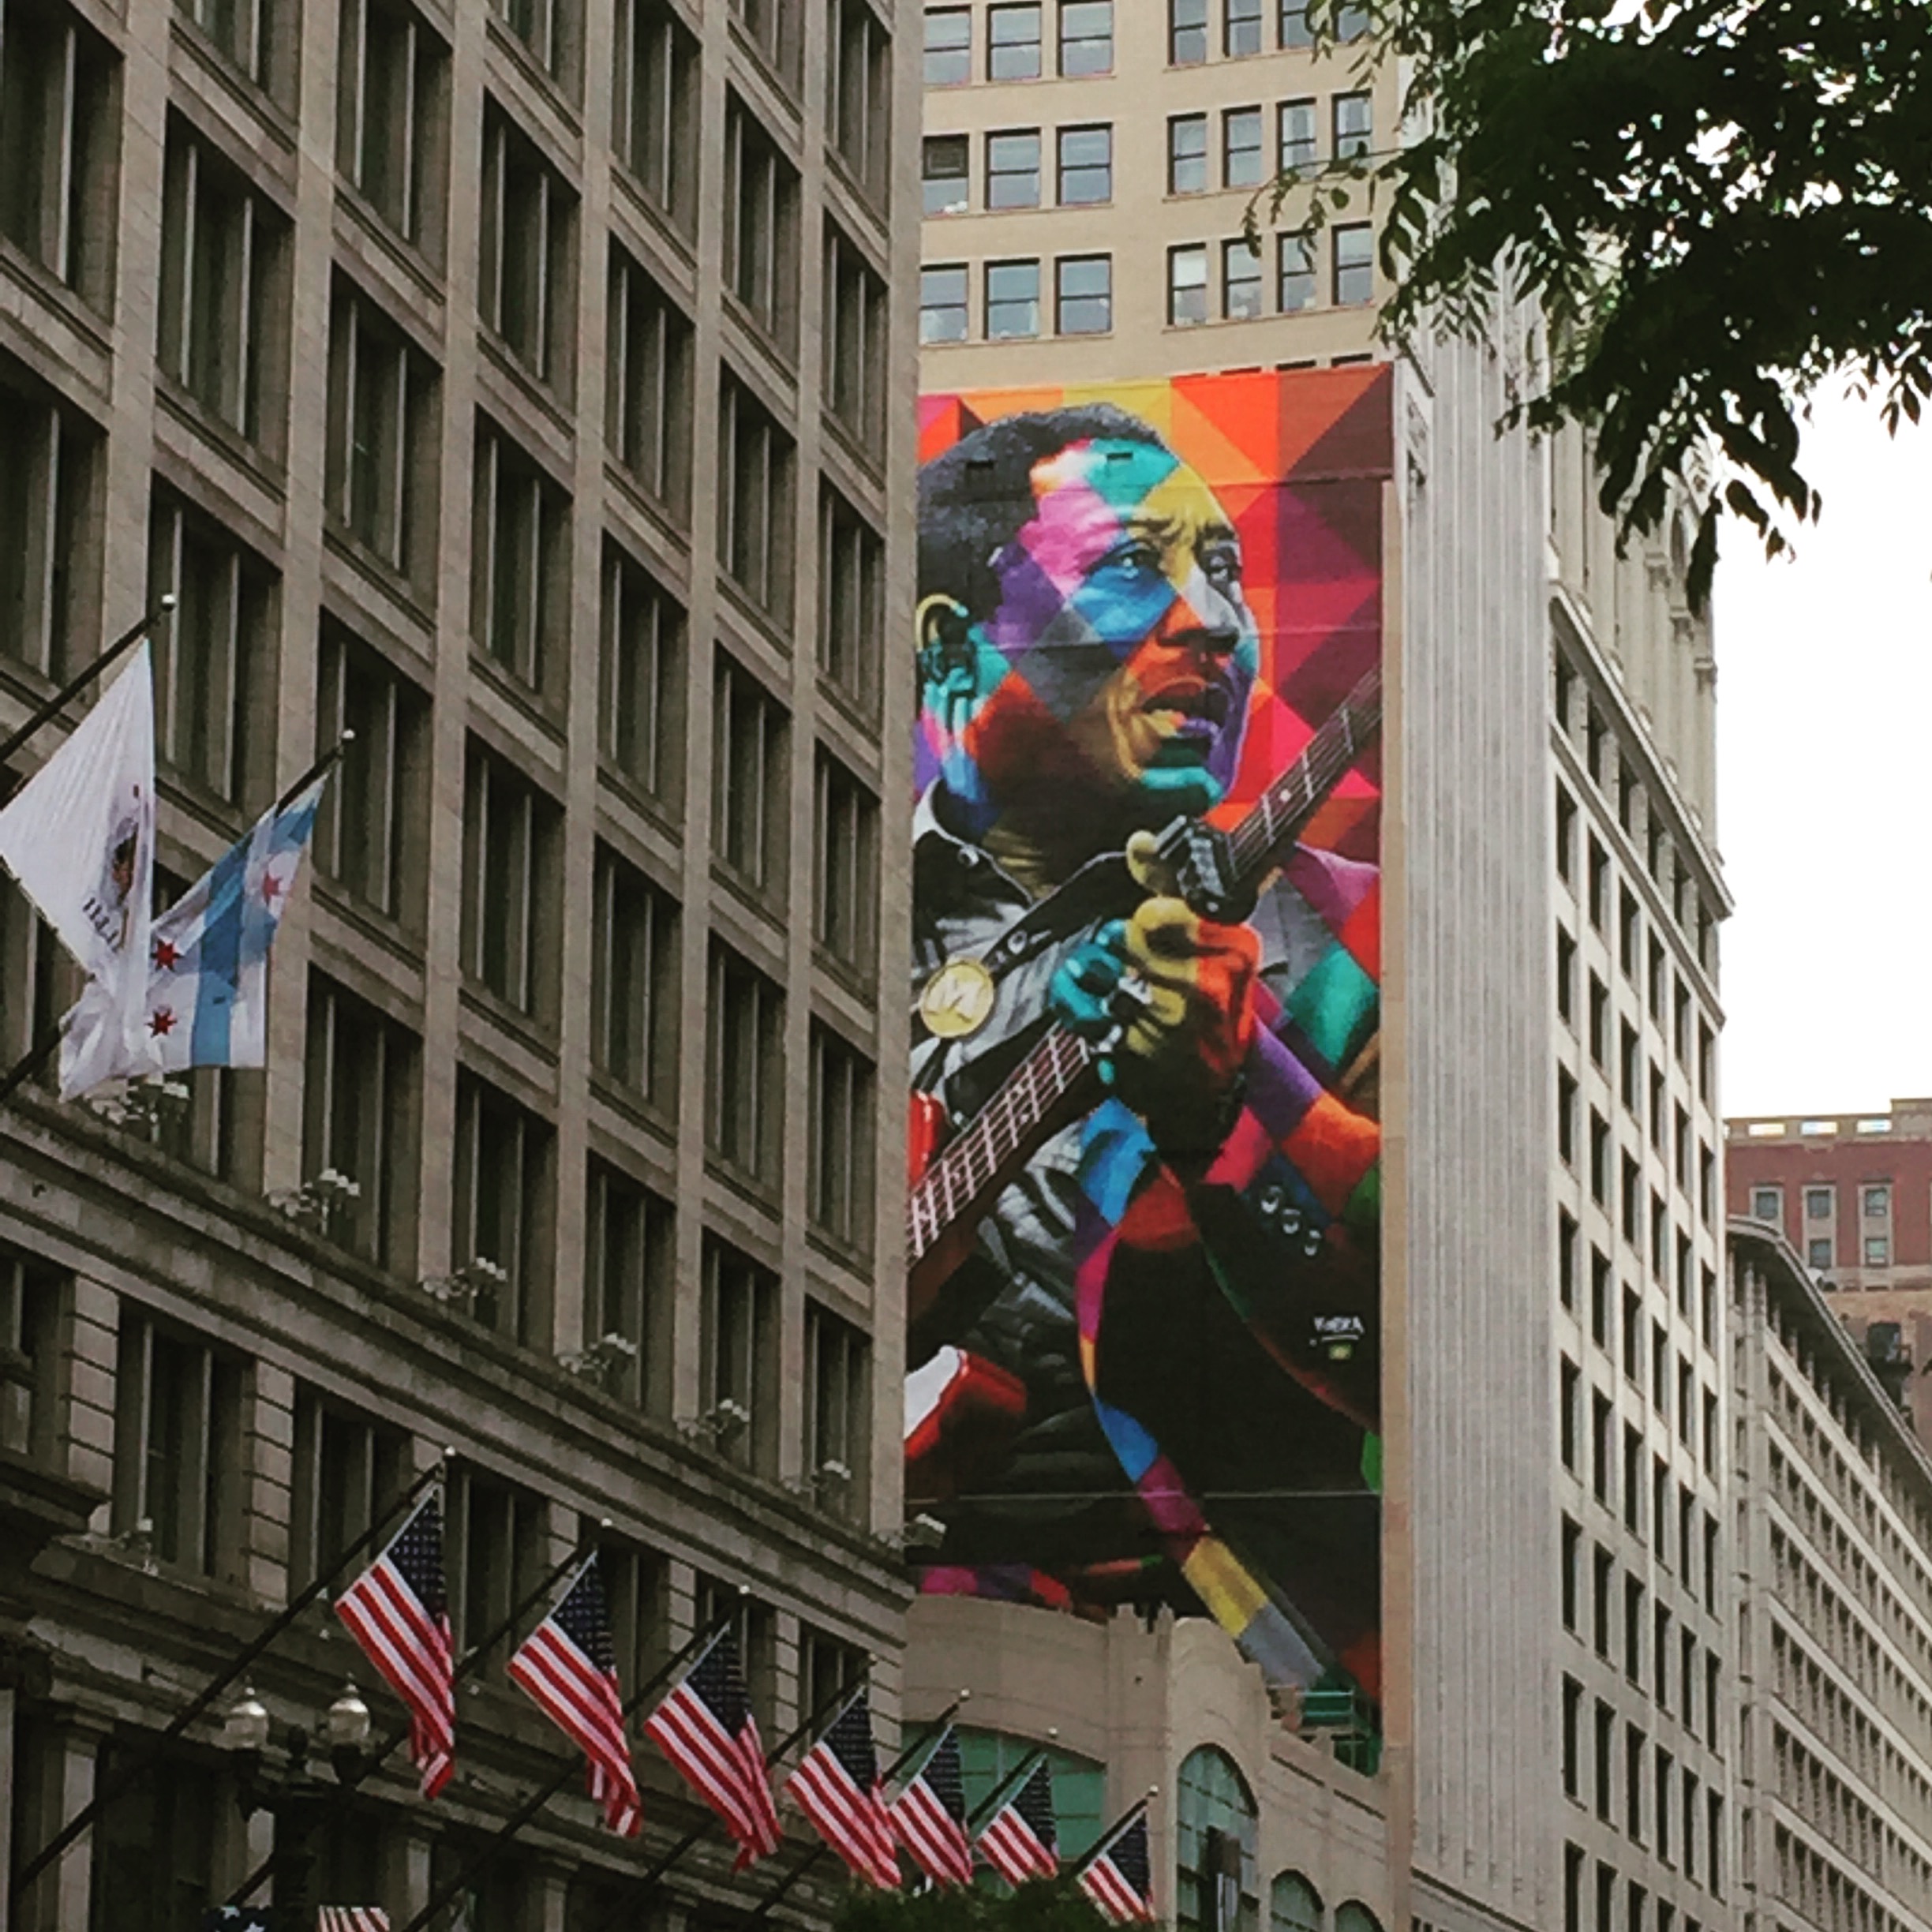 Dedication Ceremony For Legendary Blues Guitarist Muddy Waters, As Mural Goes Up On State Street